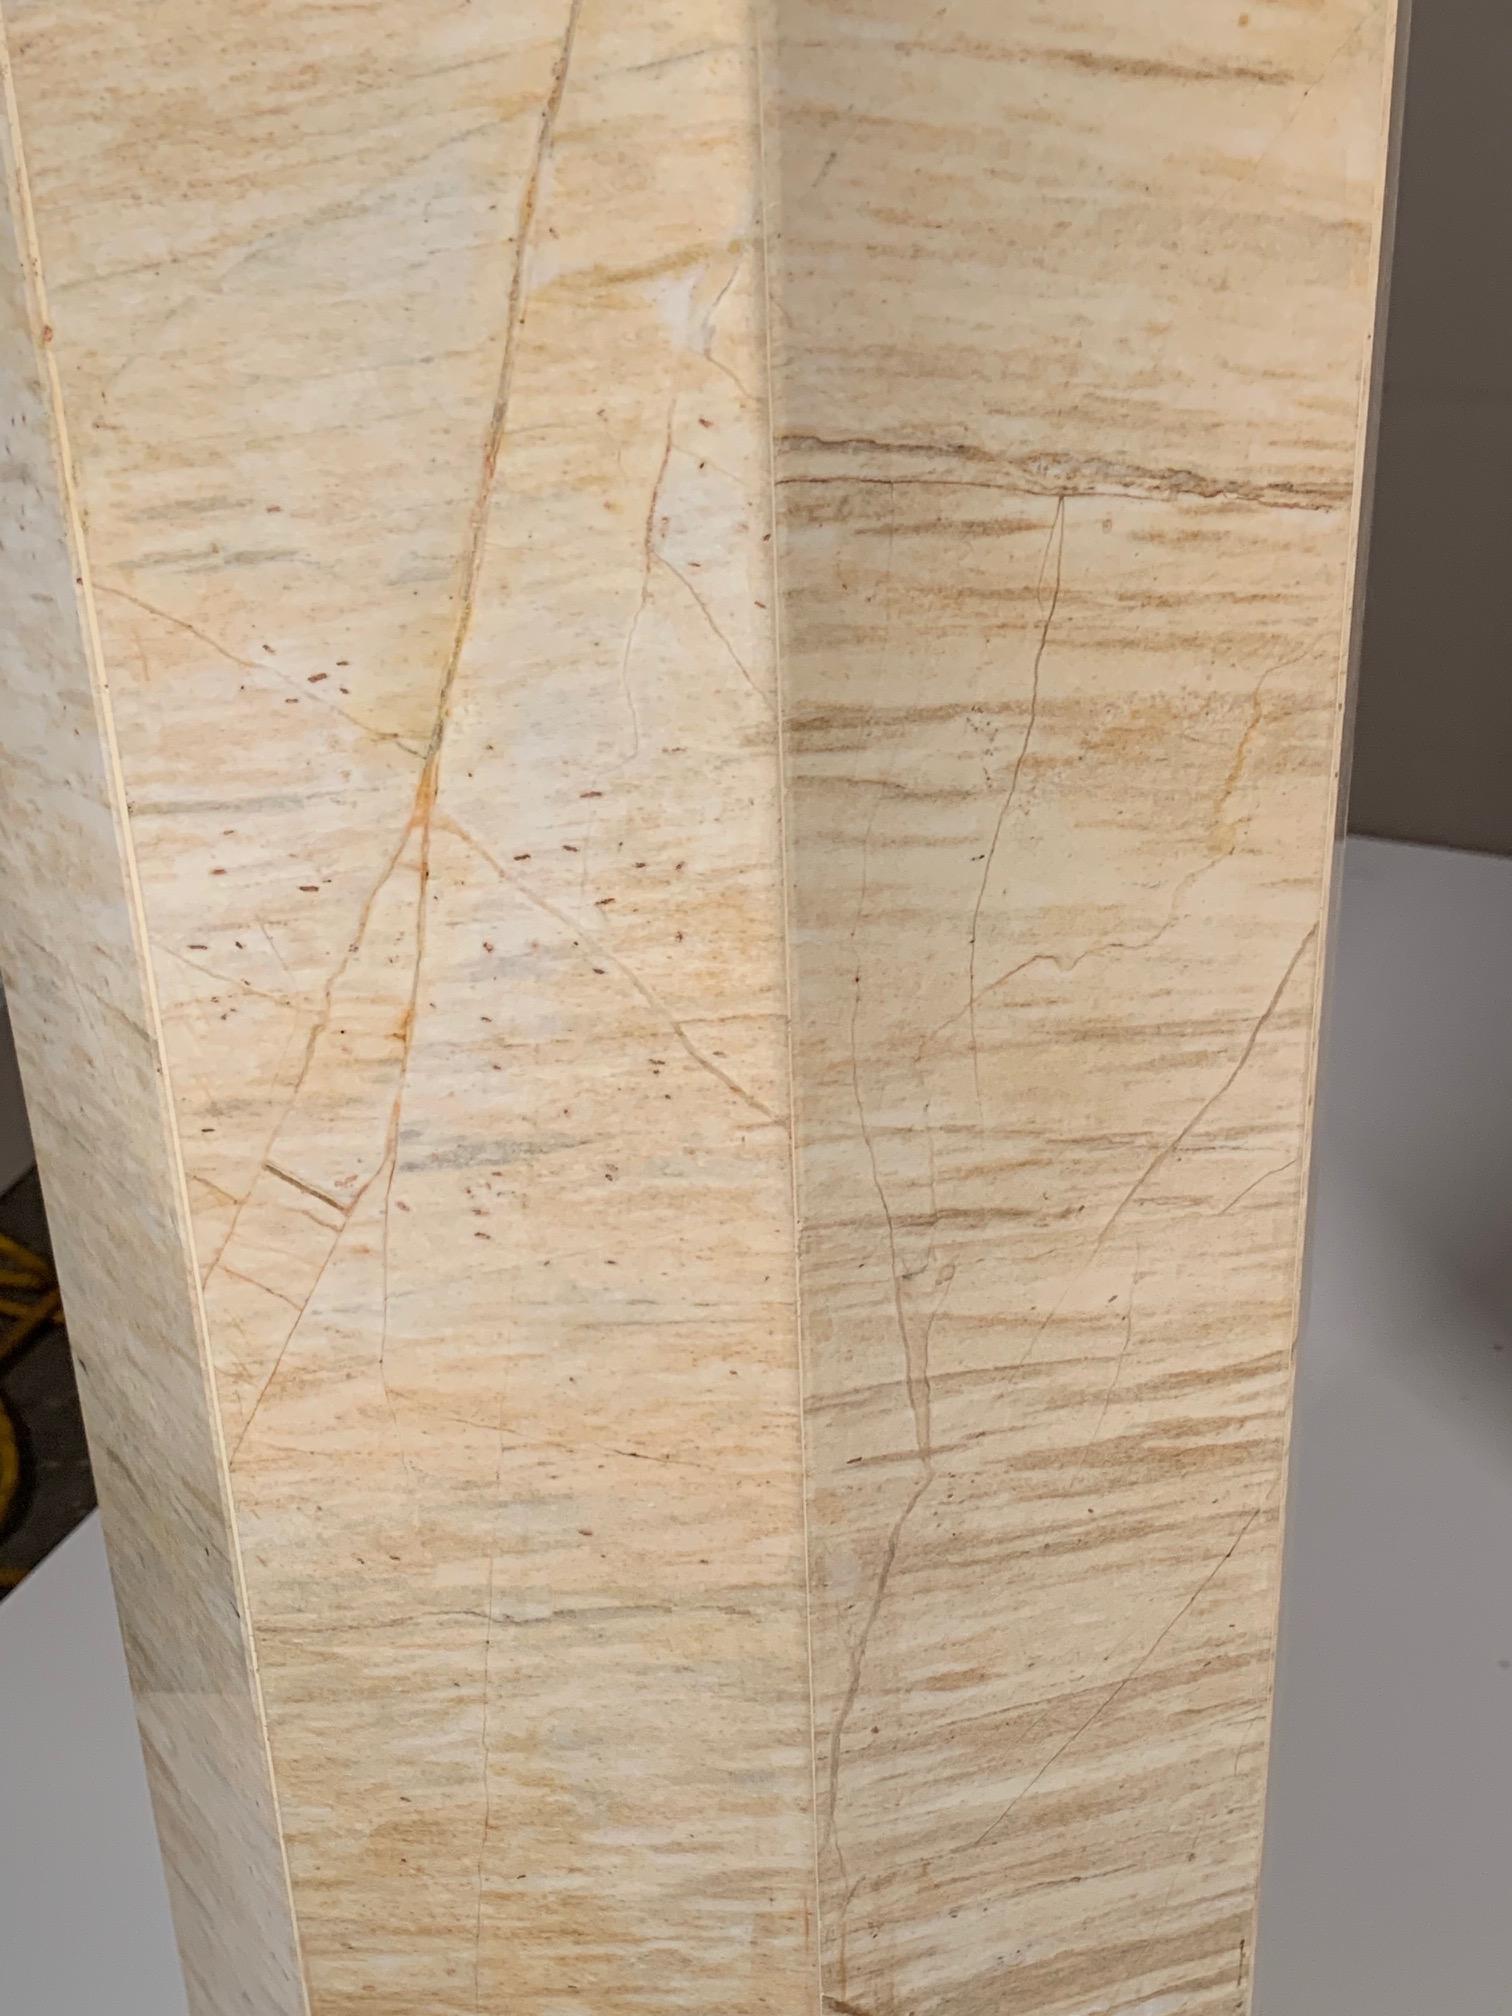 A great set of three (3) travertine pedestals, with unusual veining. Octagonal shapes, circa 1980s. Tallest is 36.5